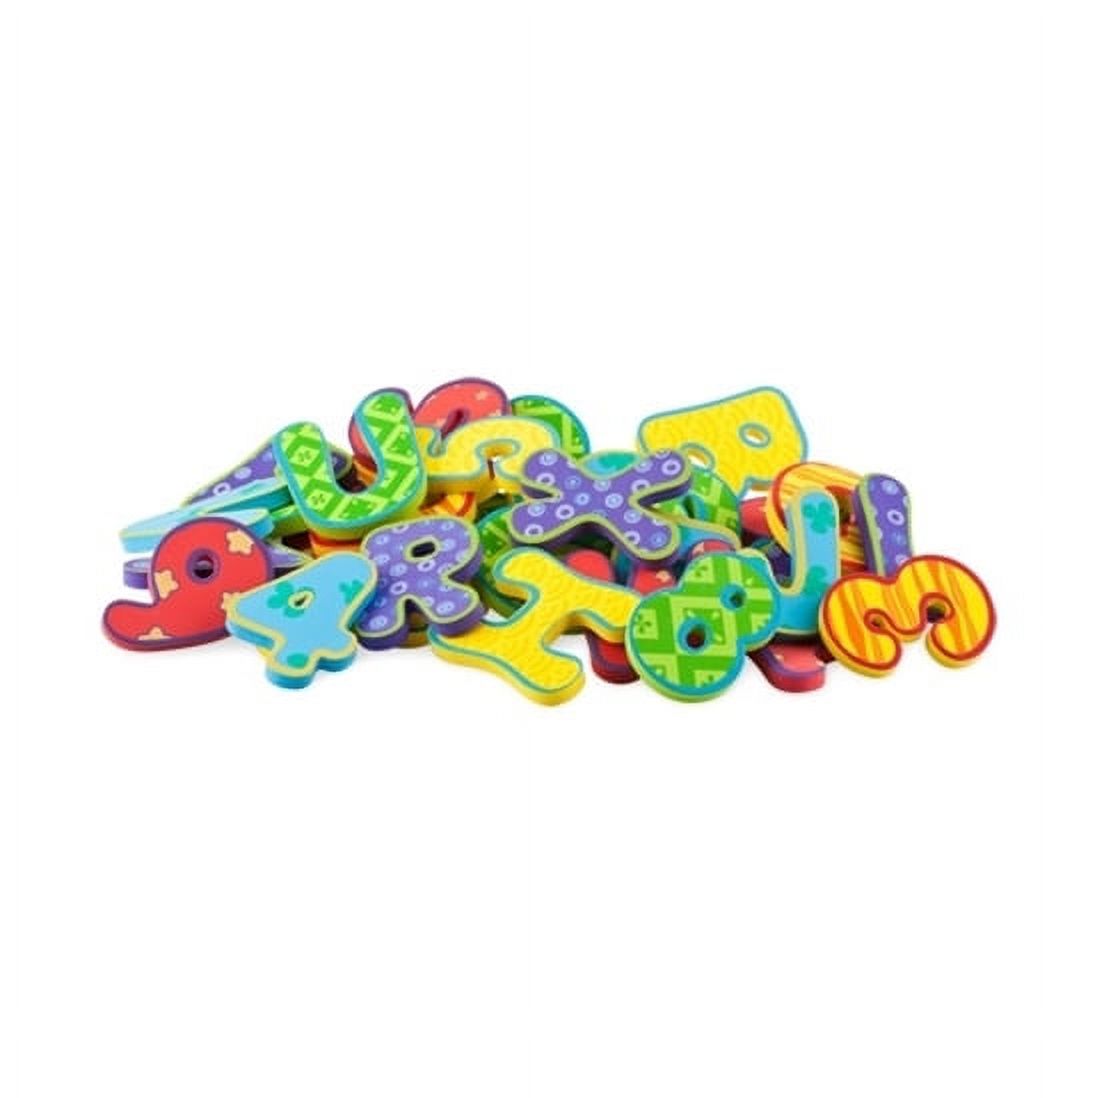 Nuby Letters and Numbers Bath Toy Set, Multicolored, 36 Count - image 2 of 4